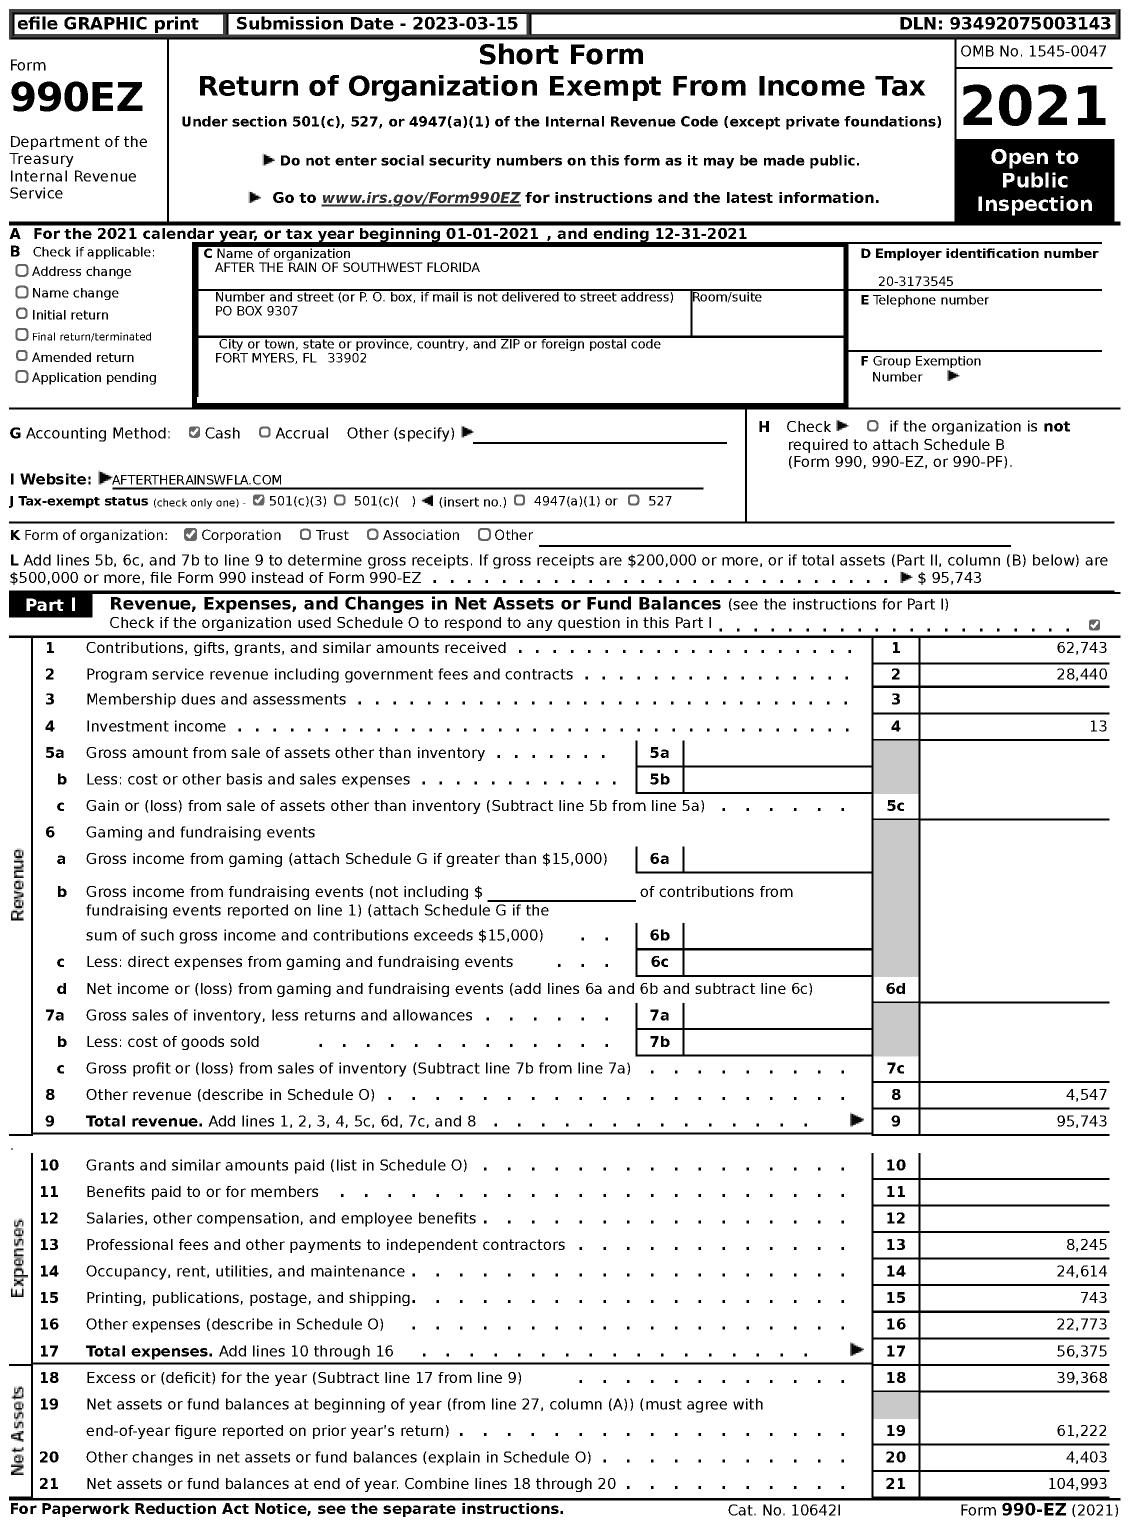 Image of first page of 2021 Form 990EZ for After the Rain of Southwest Florida